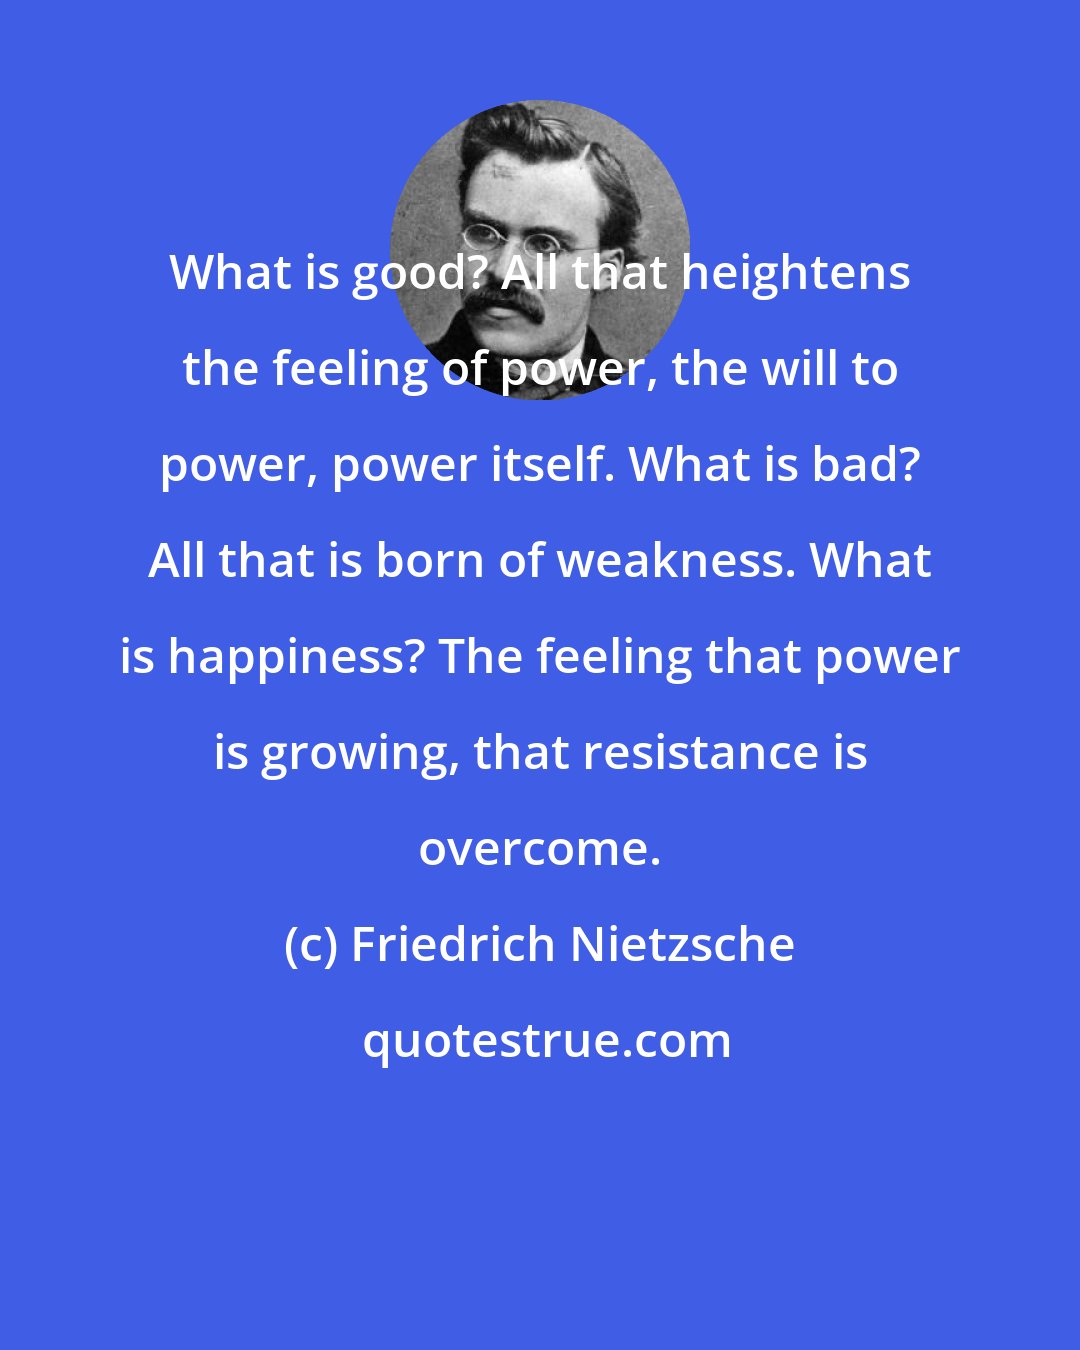 Friedrich Nietzsche: What is good? All that heightens the feeling of power, the will to power, power itself. What is bad? All that is born of weakness. What is happiness? The feeling that power is growing, that resistance is overcome.